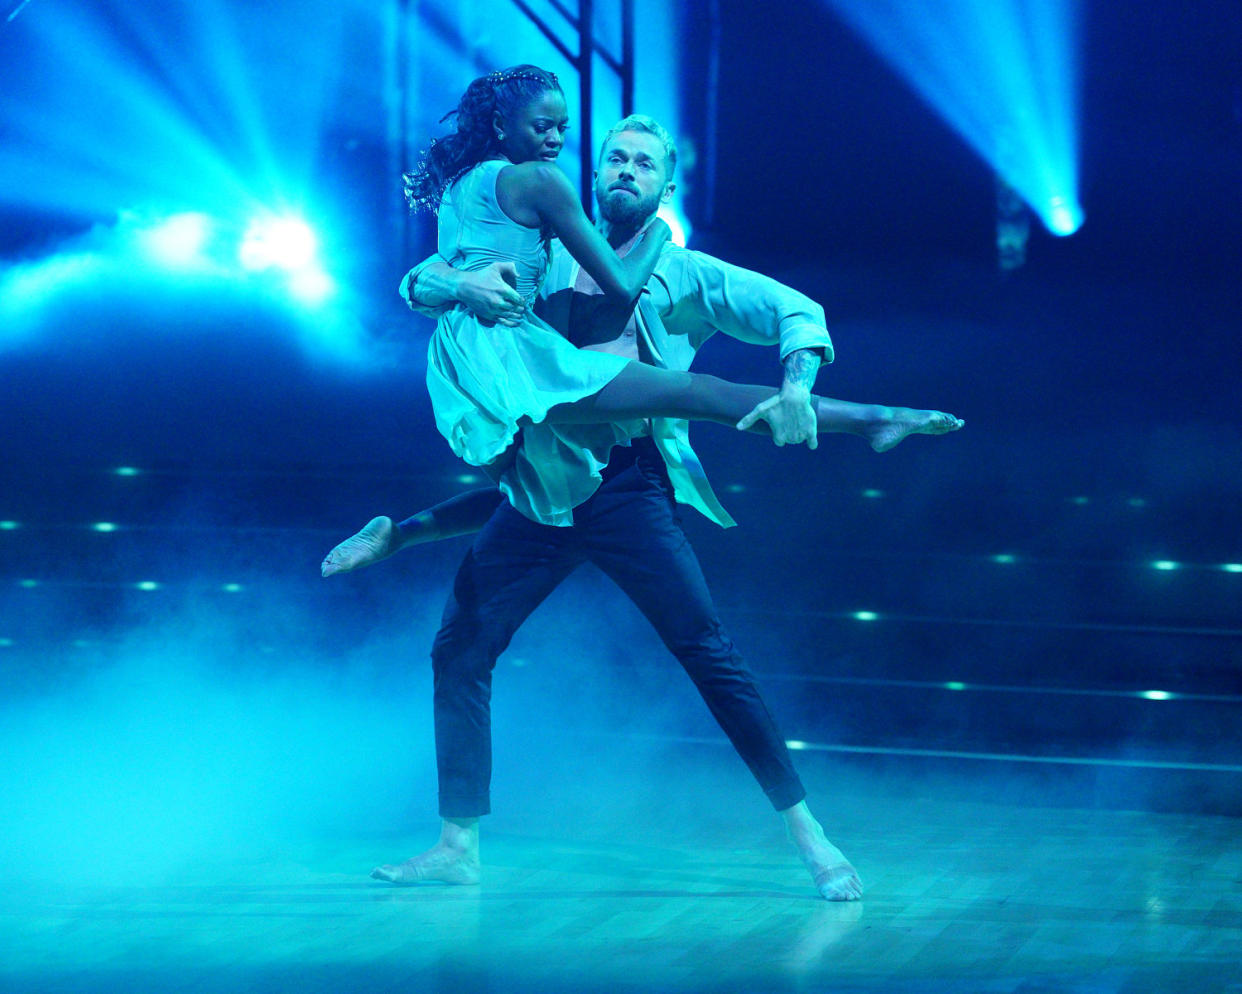 Charity Lawson and Artem Chigvintsev during the Oct. 24 episode. (Christopher Willard / The Walt Disney Company)